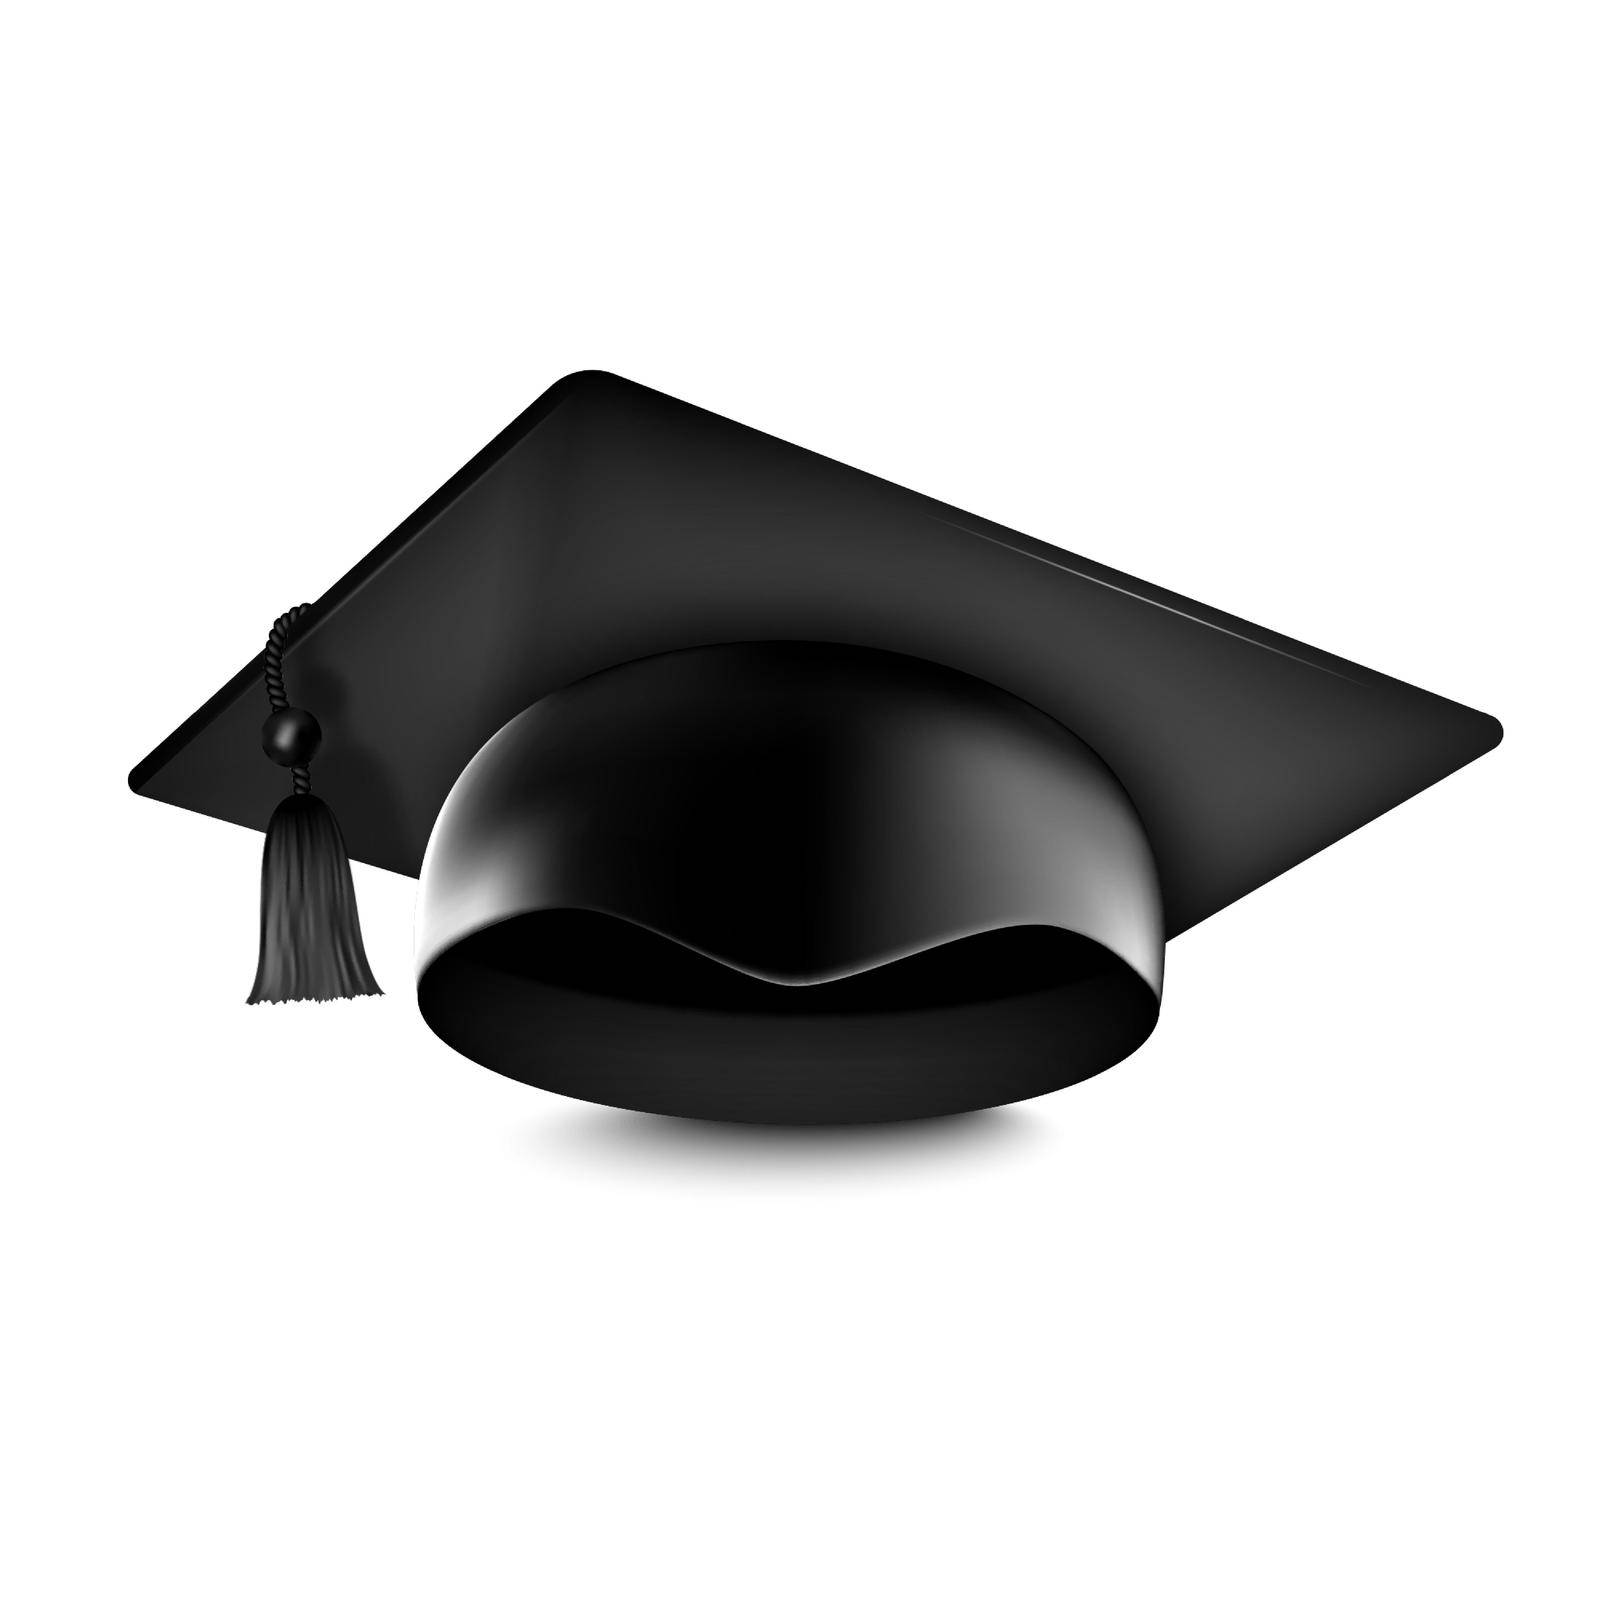 Graduation university or college black cap 3d realistic vector illustration isolated on white background. Element for degree ceremony and educational programs design. by Samodelkin20